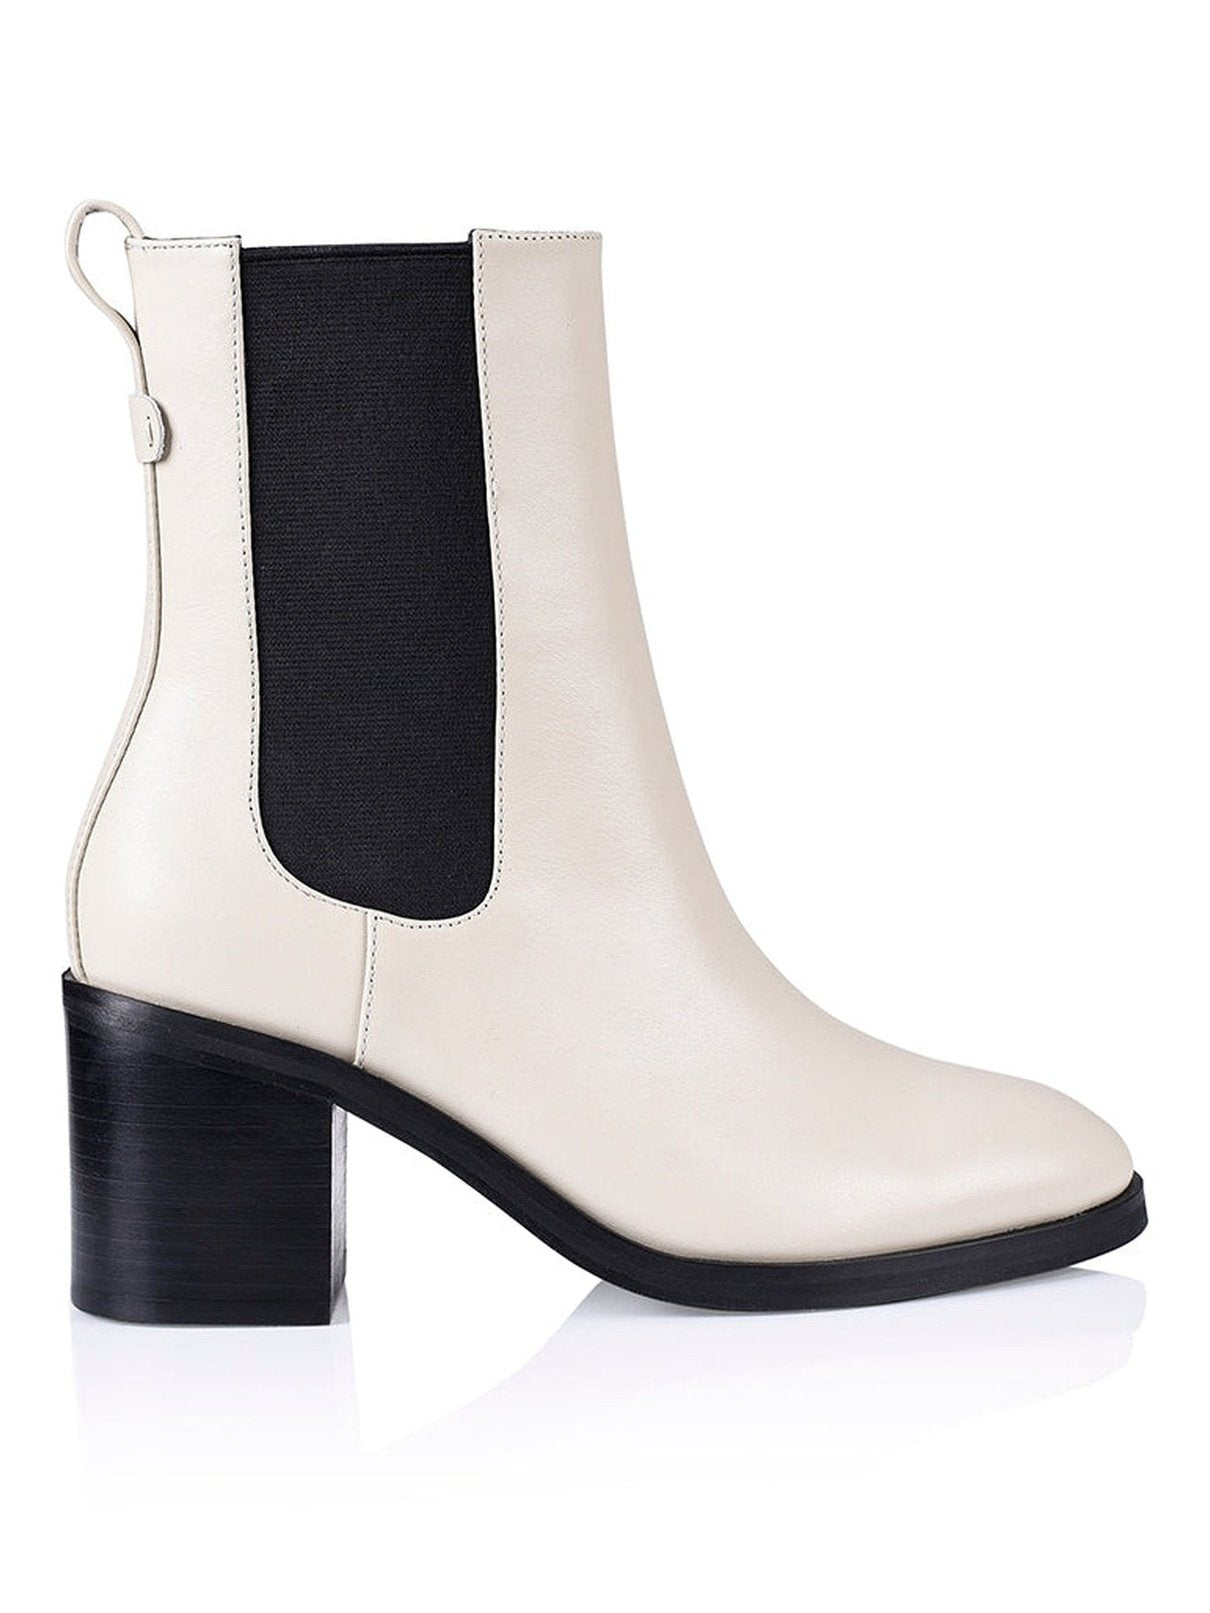 Watson Chelsea Gusset Boots - Cream Leather